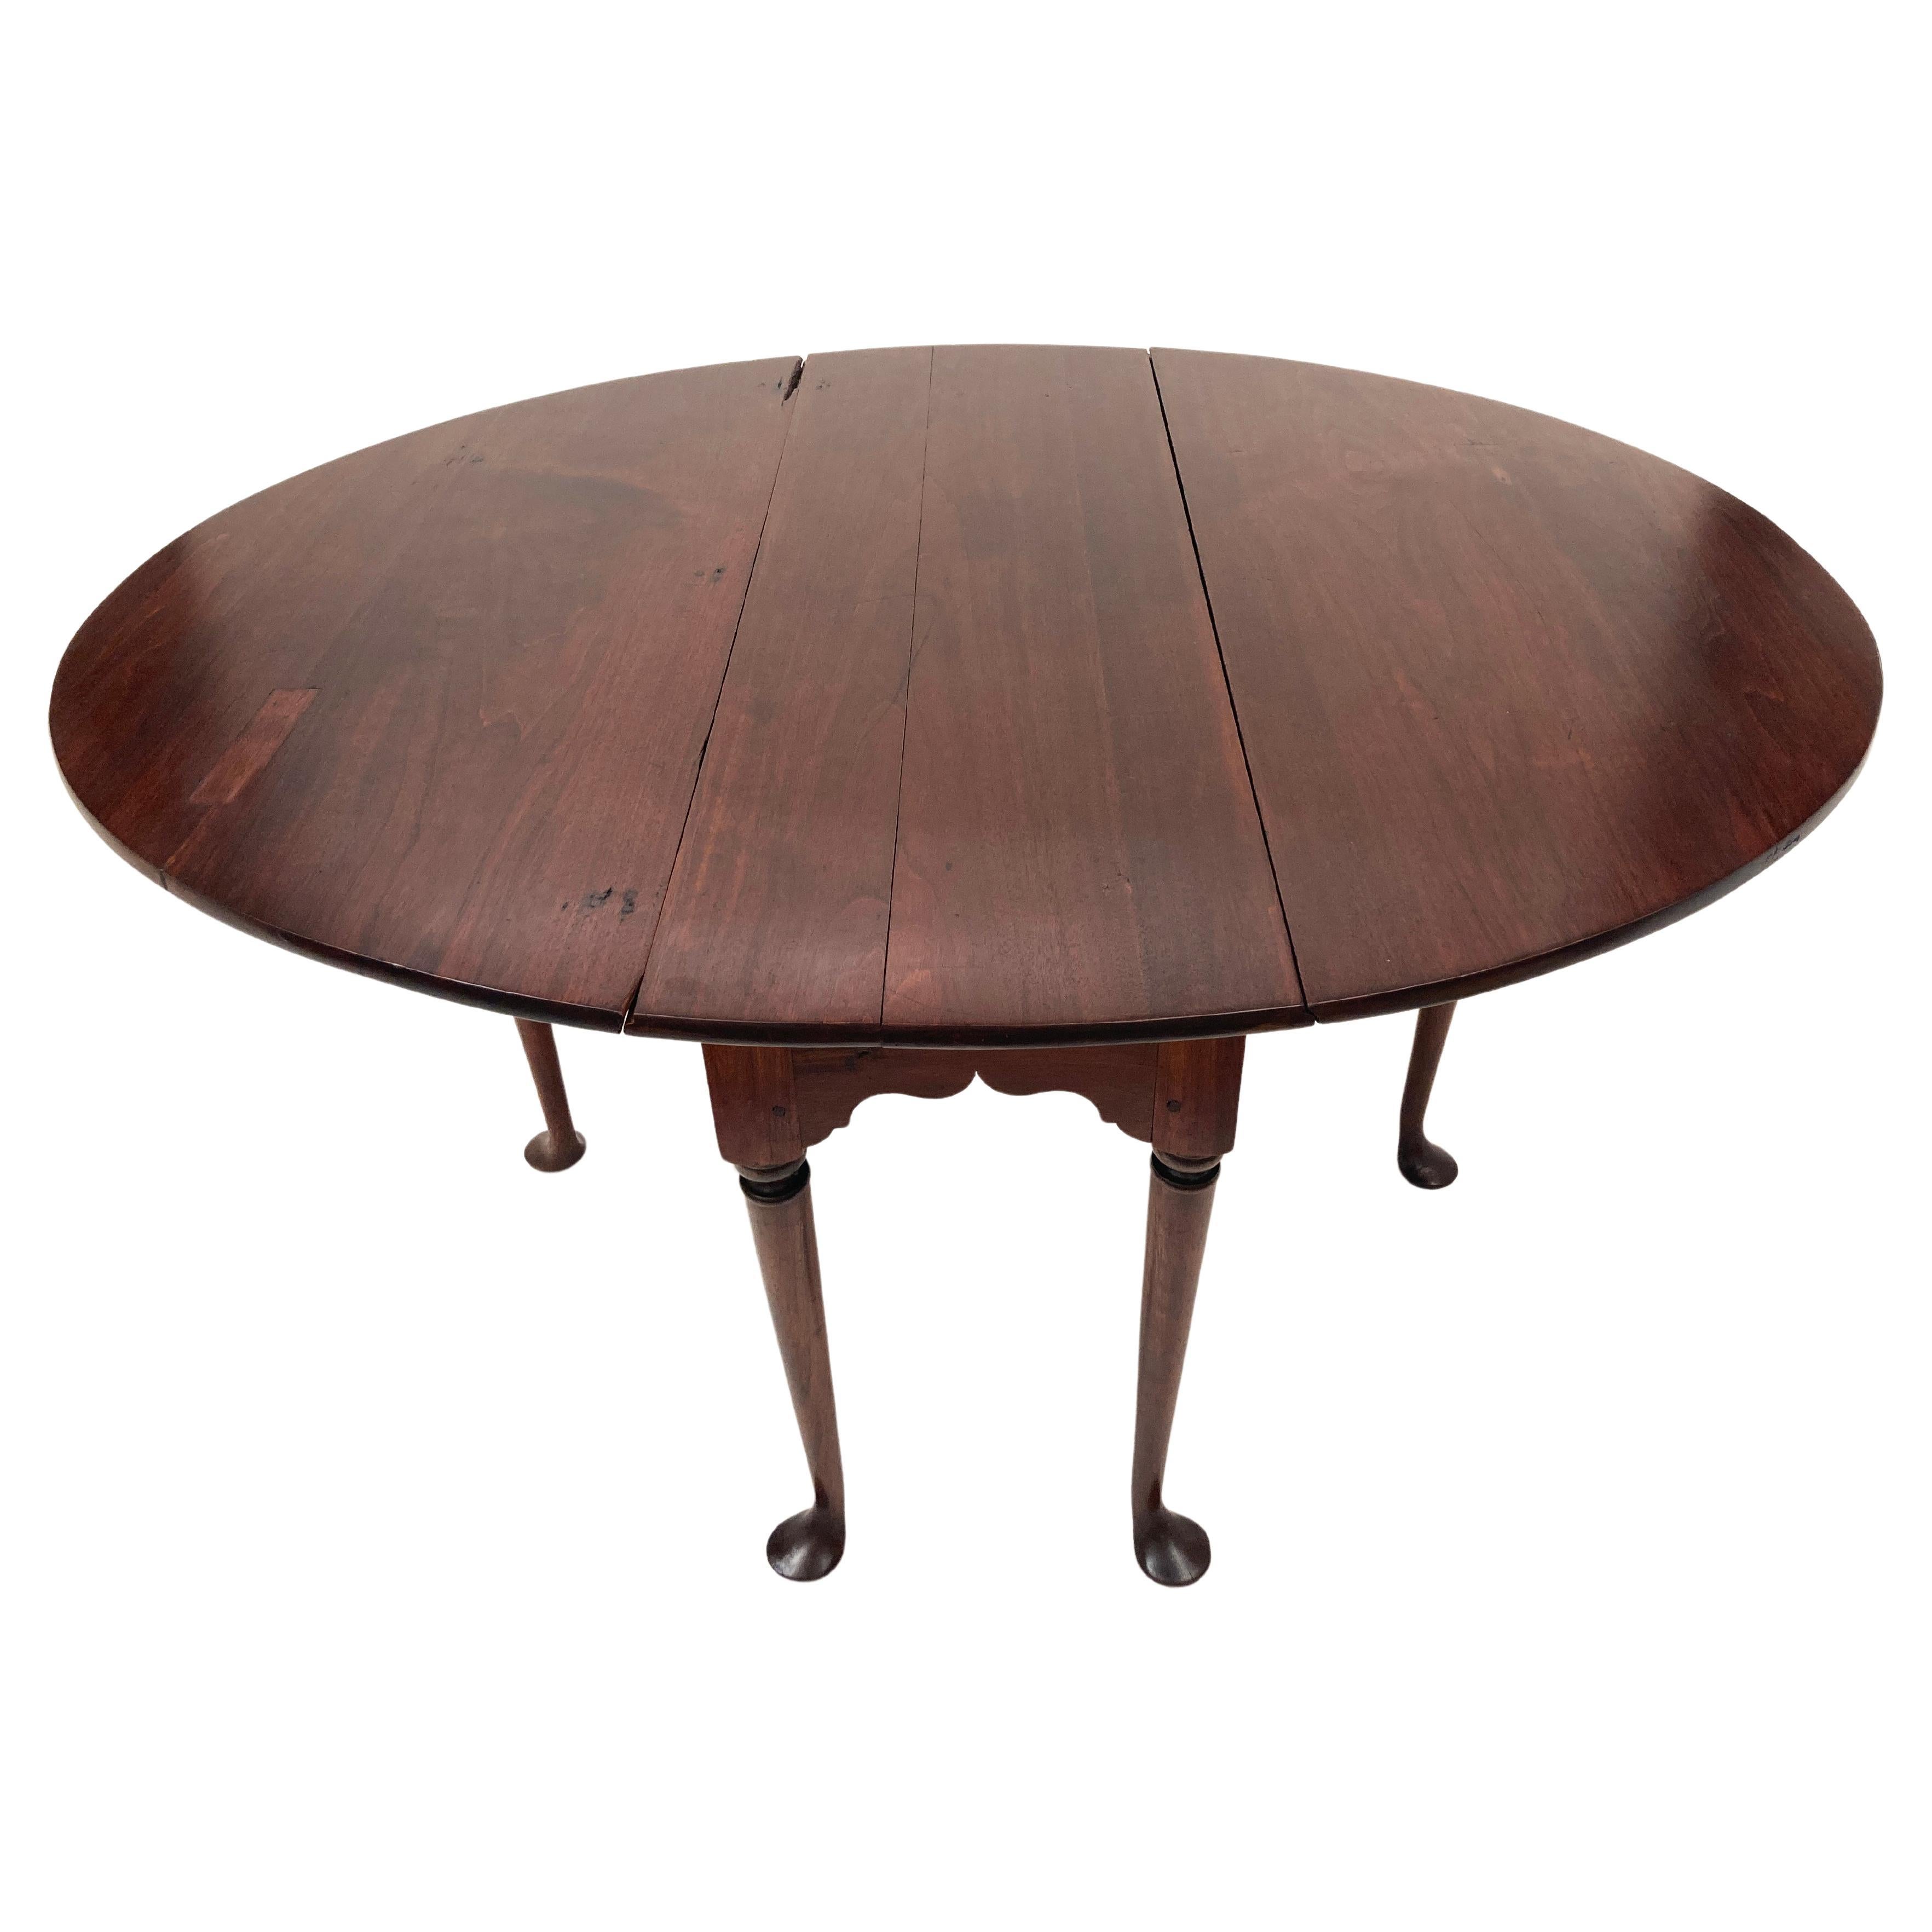 1700’s Kentucky Mahogany Drop Leaf Dining Table With Gate-Legs